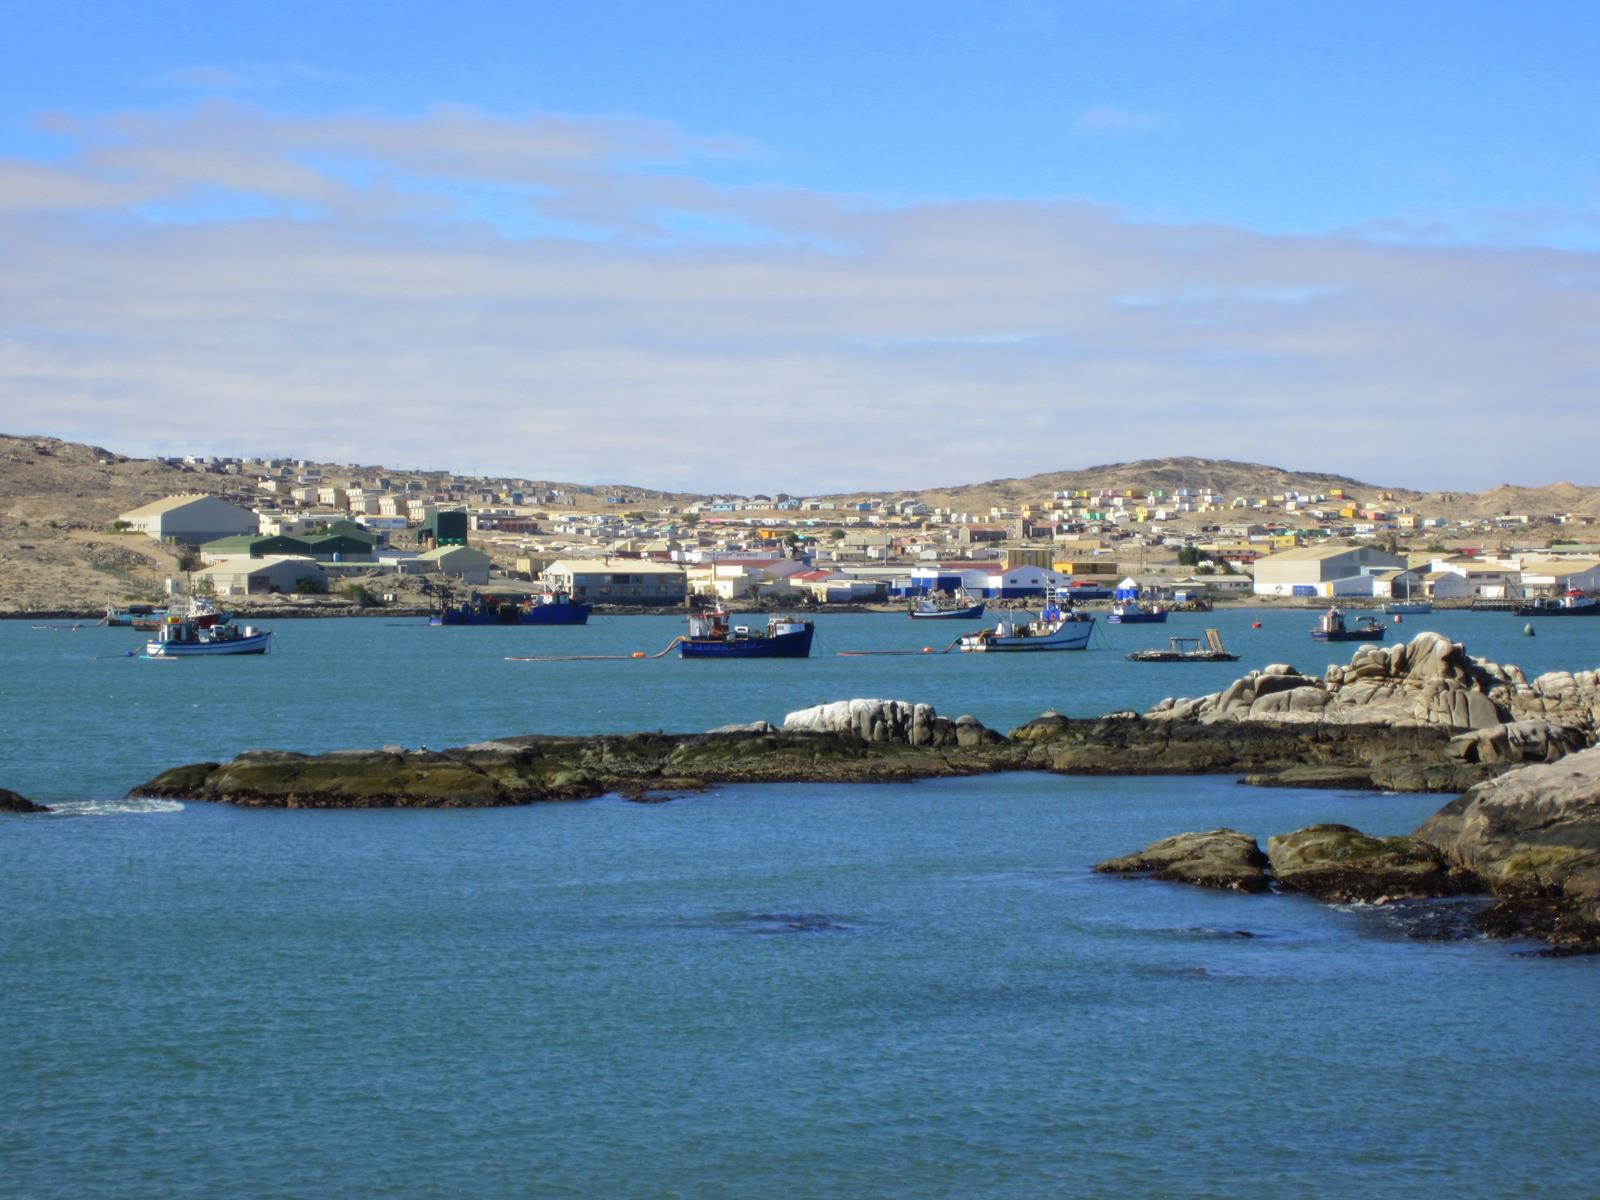 Boats in the Luderitz harbour. 